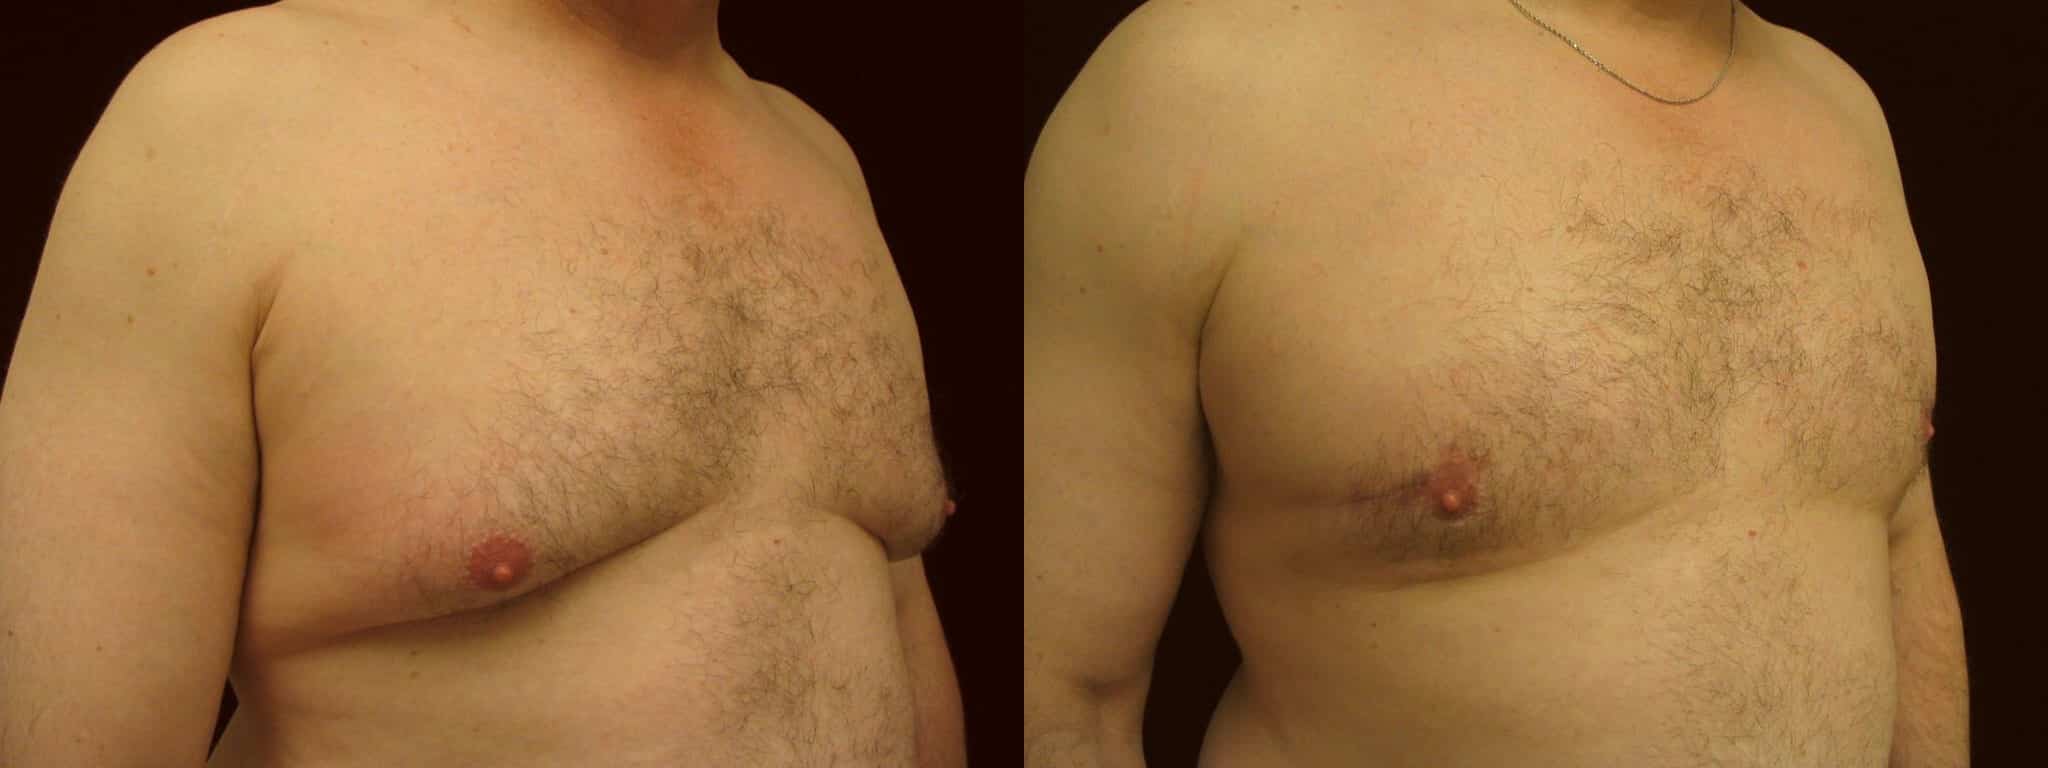 Gynecomastia Patient 4 Before & After Details